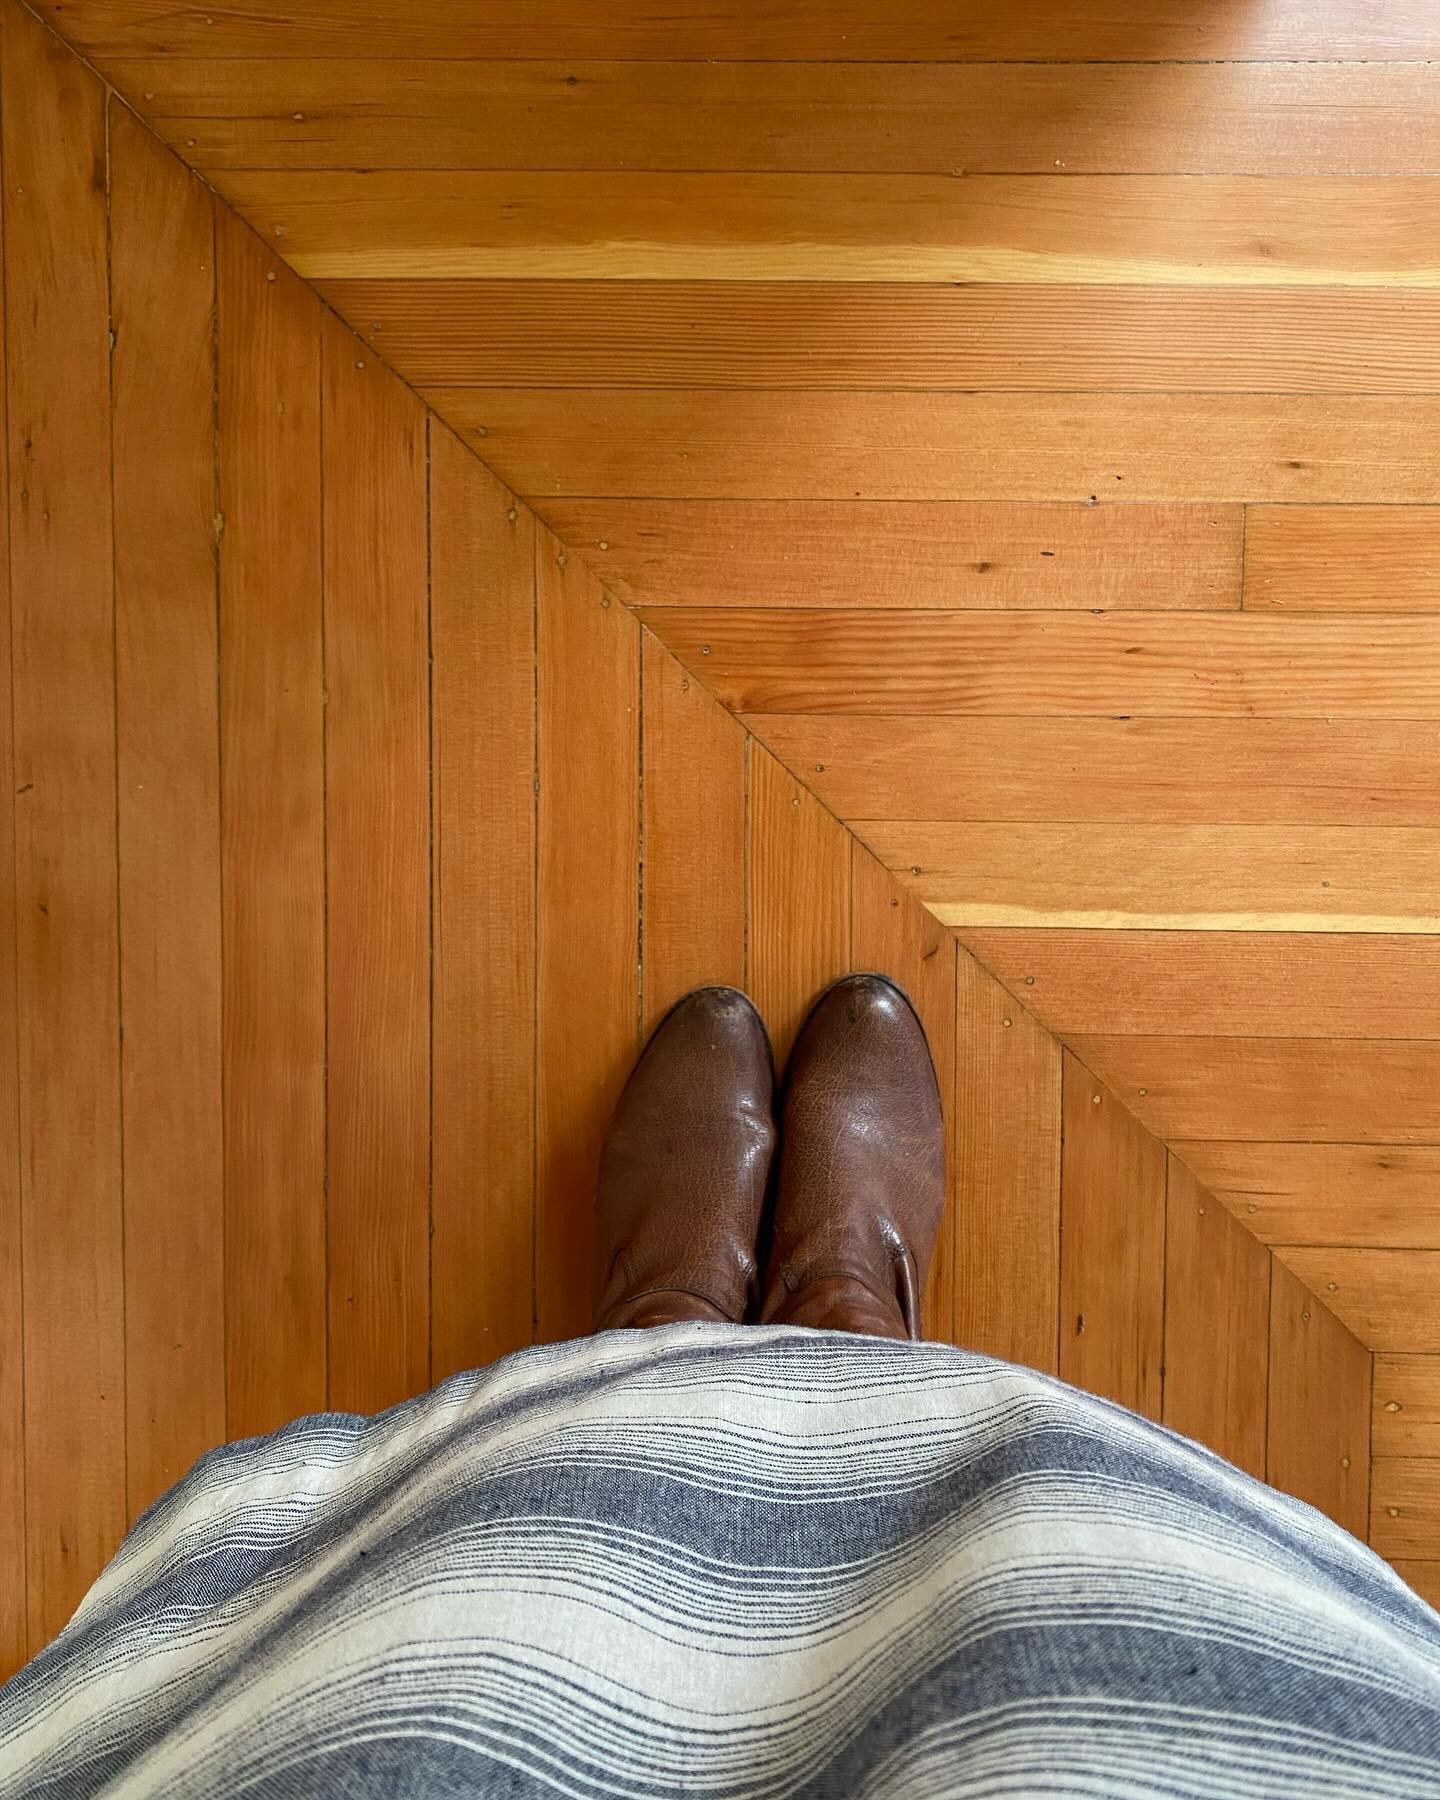 Touring homes and loving all the pretty floors 😍 

Are YOU ready to find the flooring of your dreams?! Let&rsquo;s chat and I can help find the four walls and a roof to complete your picture perfect home 🏡 

#amyhydenhomes #ihavethisthingwithfloors